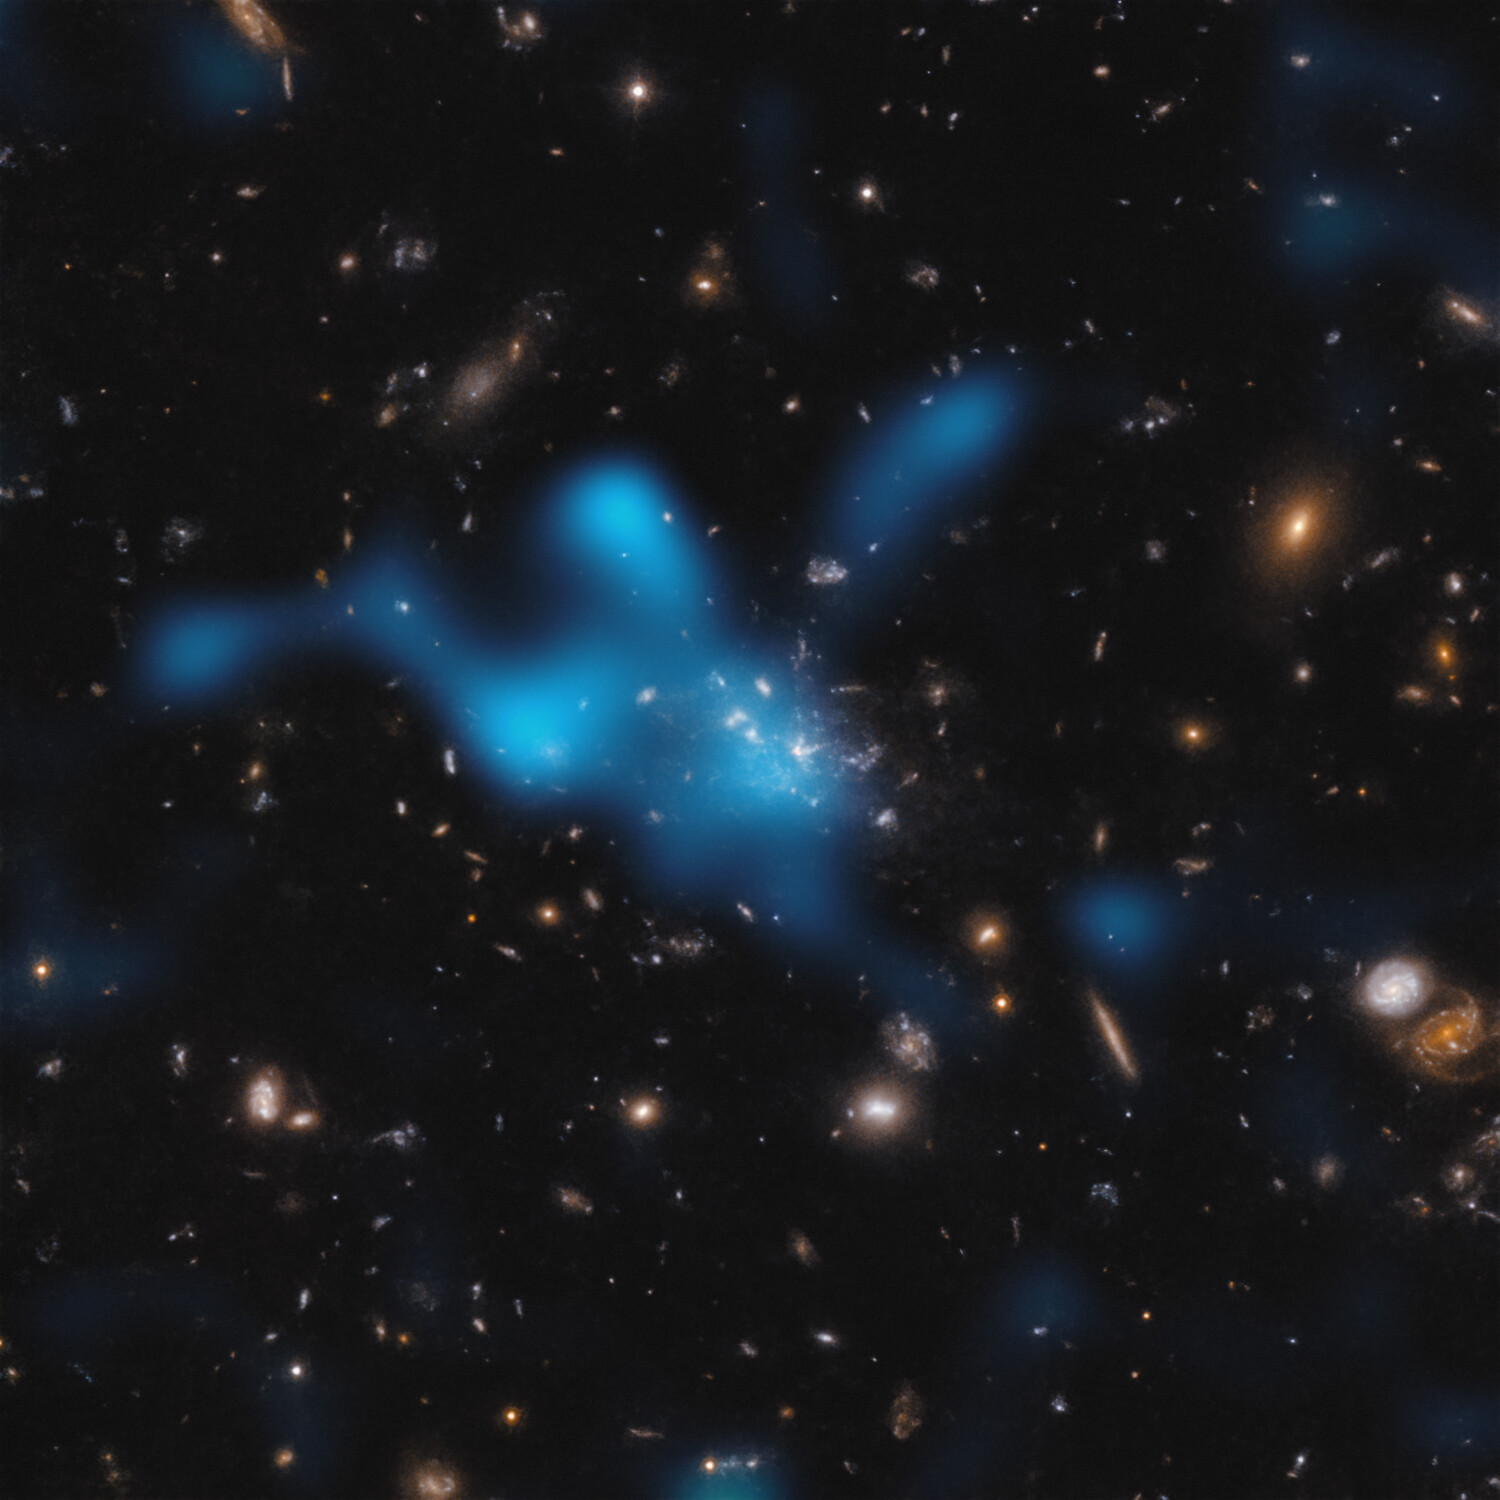 This image shows the protocluster around the Spiderweb galaxy (formally known as MRC 1138-262), seen at a time when the Universe was only 3 billion years old. Most of the mass in the protocluster does not reside in the galaxies that can be seen in the centre of the image, but in the gas known as the intracluster medium (ICM). The hot gas in the ICM is shown as an overlaid blue cloud. The hot gas was detected with the Atacama Large Millimeter/submillimeter Array (ALMA), of which ESO is a partner. As light from the cosmic microwave background –– the relic radiation from the Big Bang –– travels through the ICM, it gains energy when it interacts with the electrons in the hot gas. This is known as the Sunyaev-Zeldovich effect. By studying this effect, astronomers can infer how much hot gas resides in the ICM, and show that the Spiderweb protocluster is in the process of becoming a massive cluster held together by its own gravity. Credit: ESO/Di Mascolo et al.; HST: H. Ford